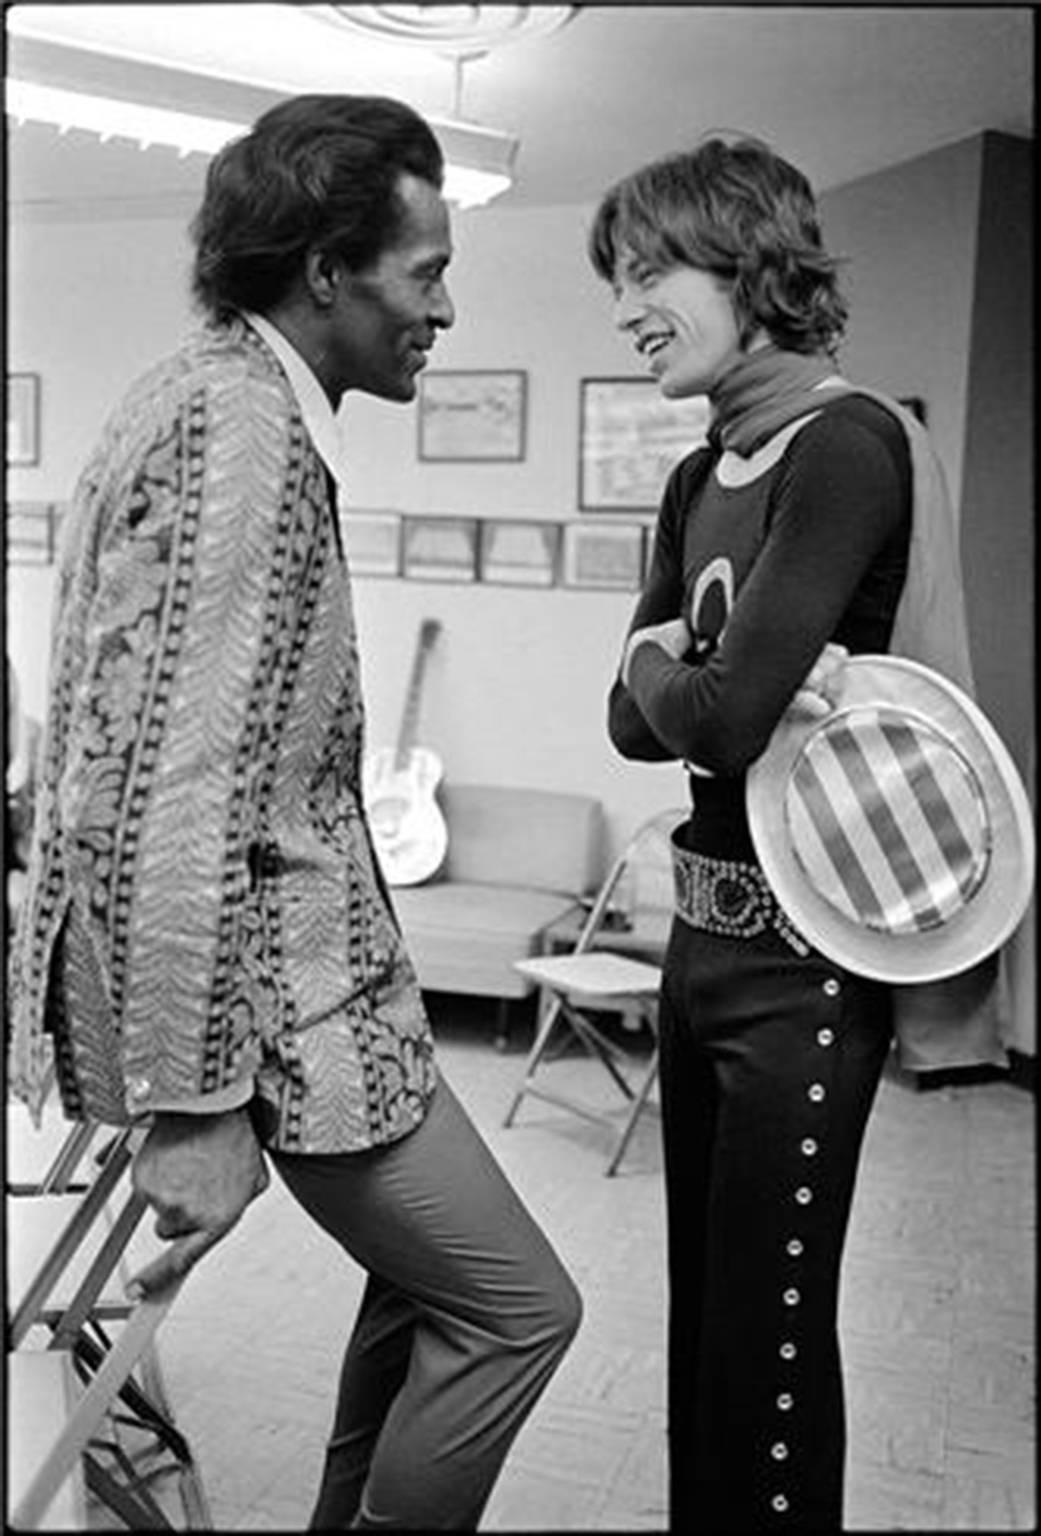 Ethan Russell Black and White Photograph - Mick Jagger and Chuck Berry 1969